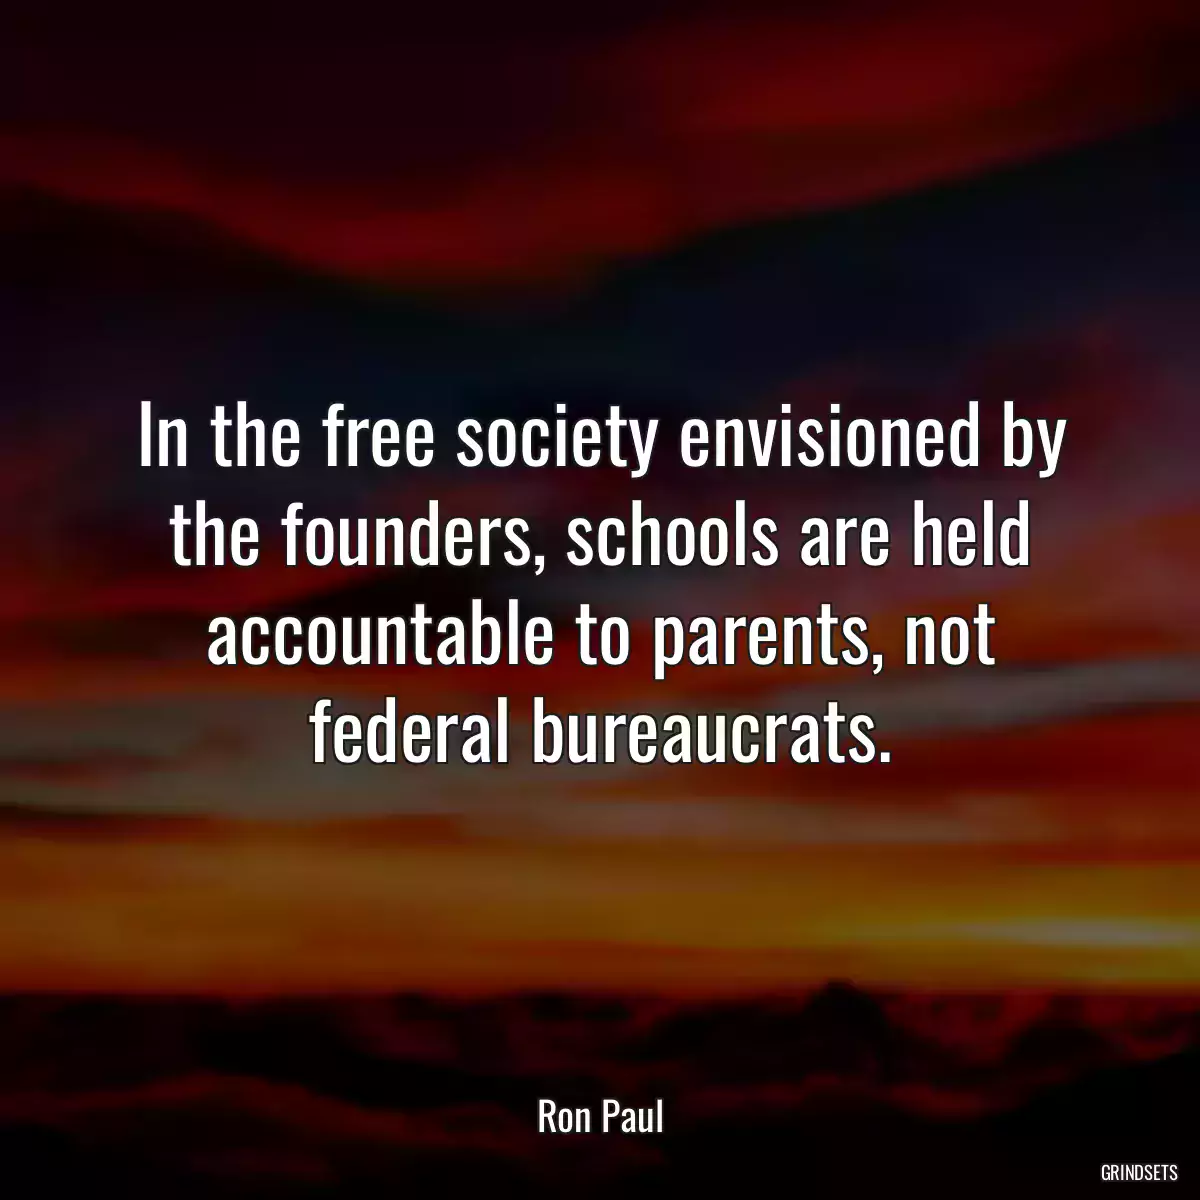 In the free society envisioned by the founders, schools are held accountable to parents, not federal bureaucrats.